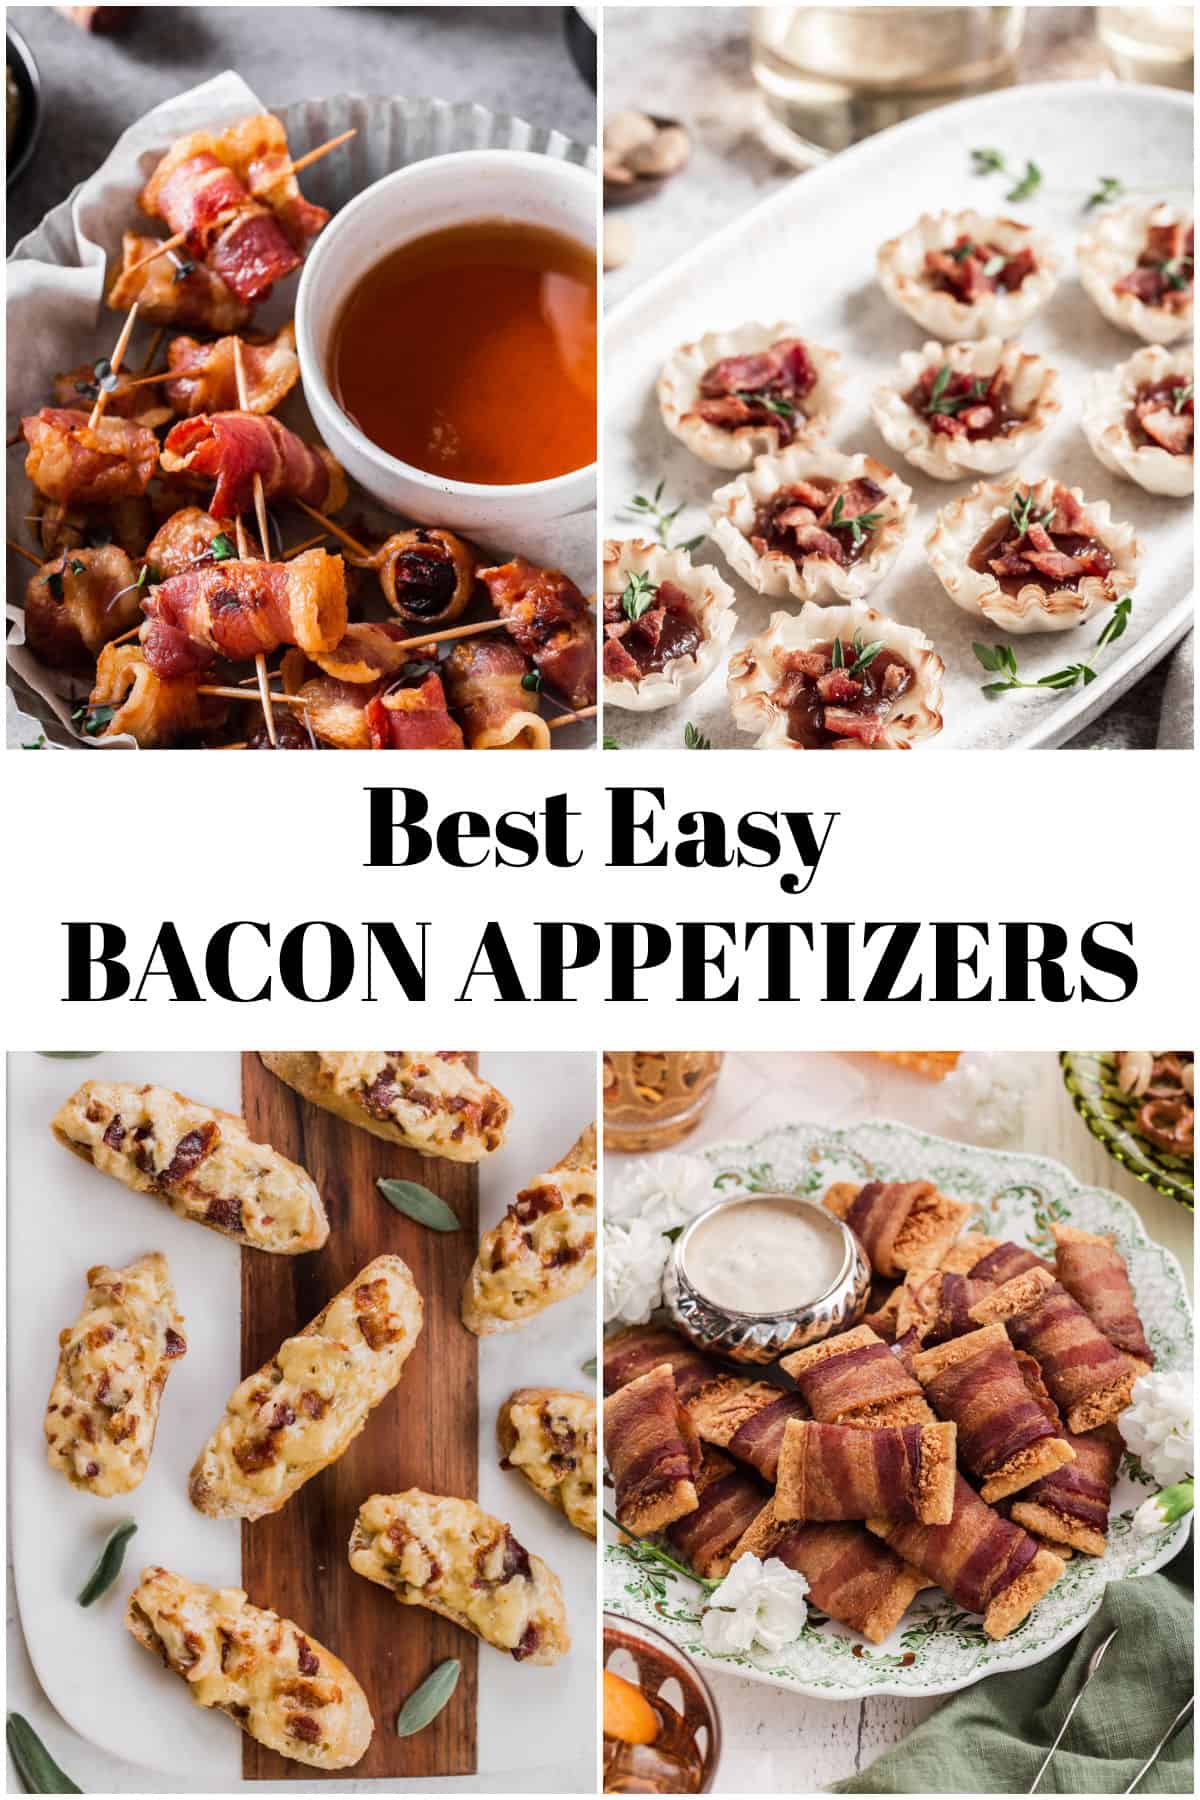 photo collage of 4 recipes and text saying best easy bacon appetizers.